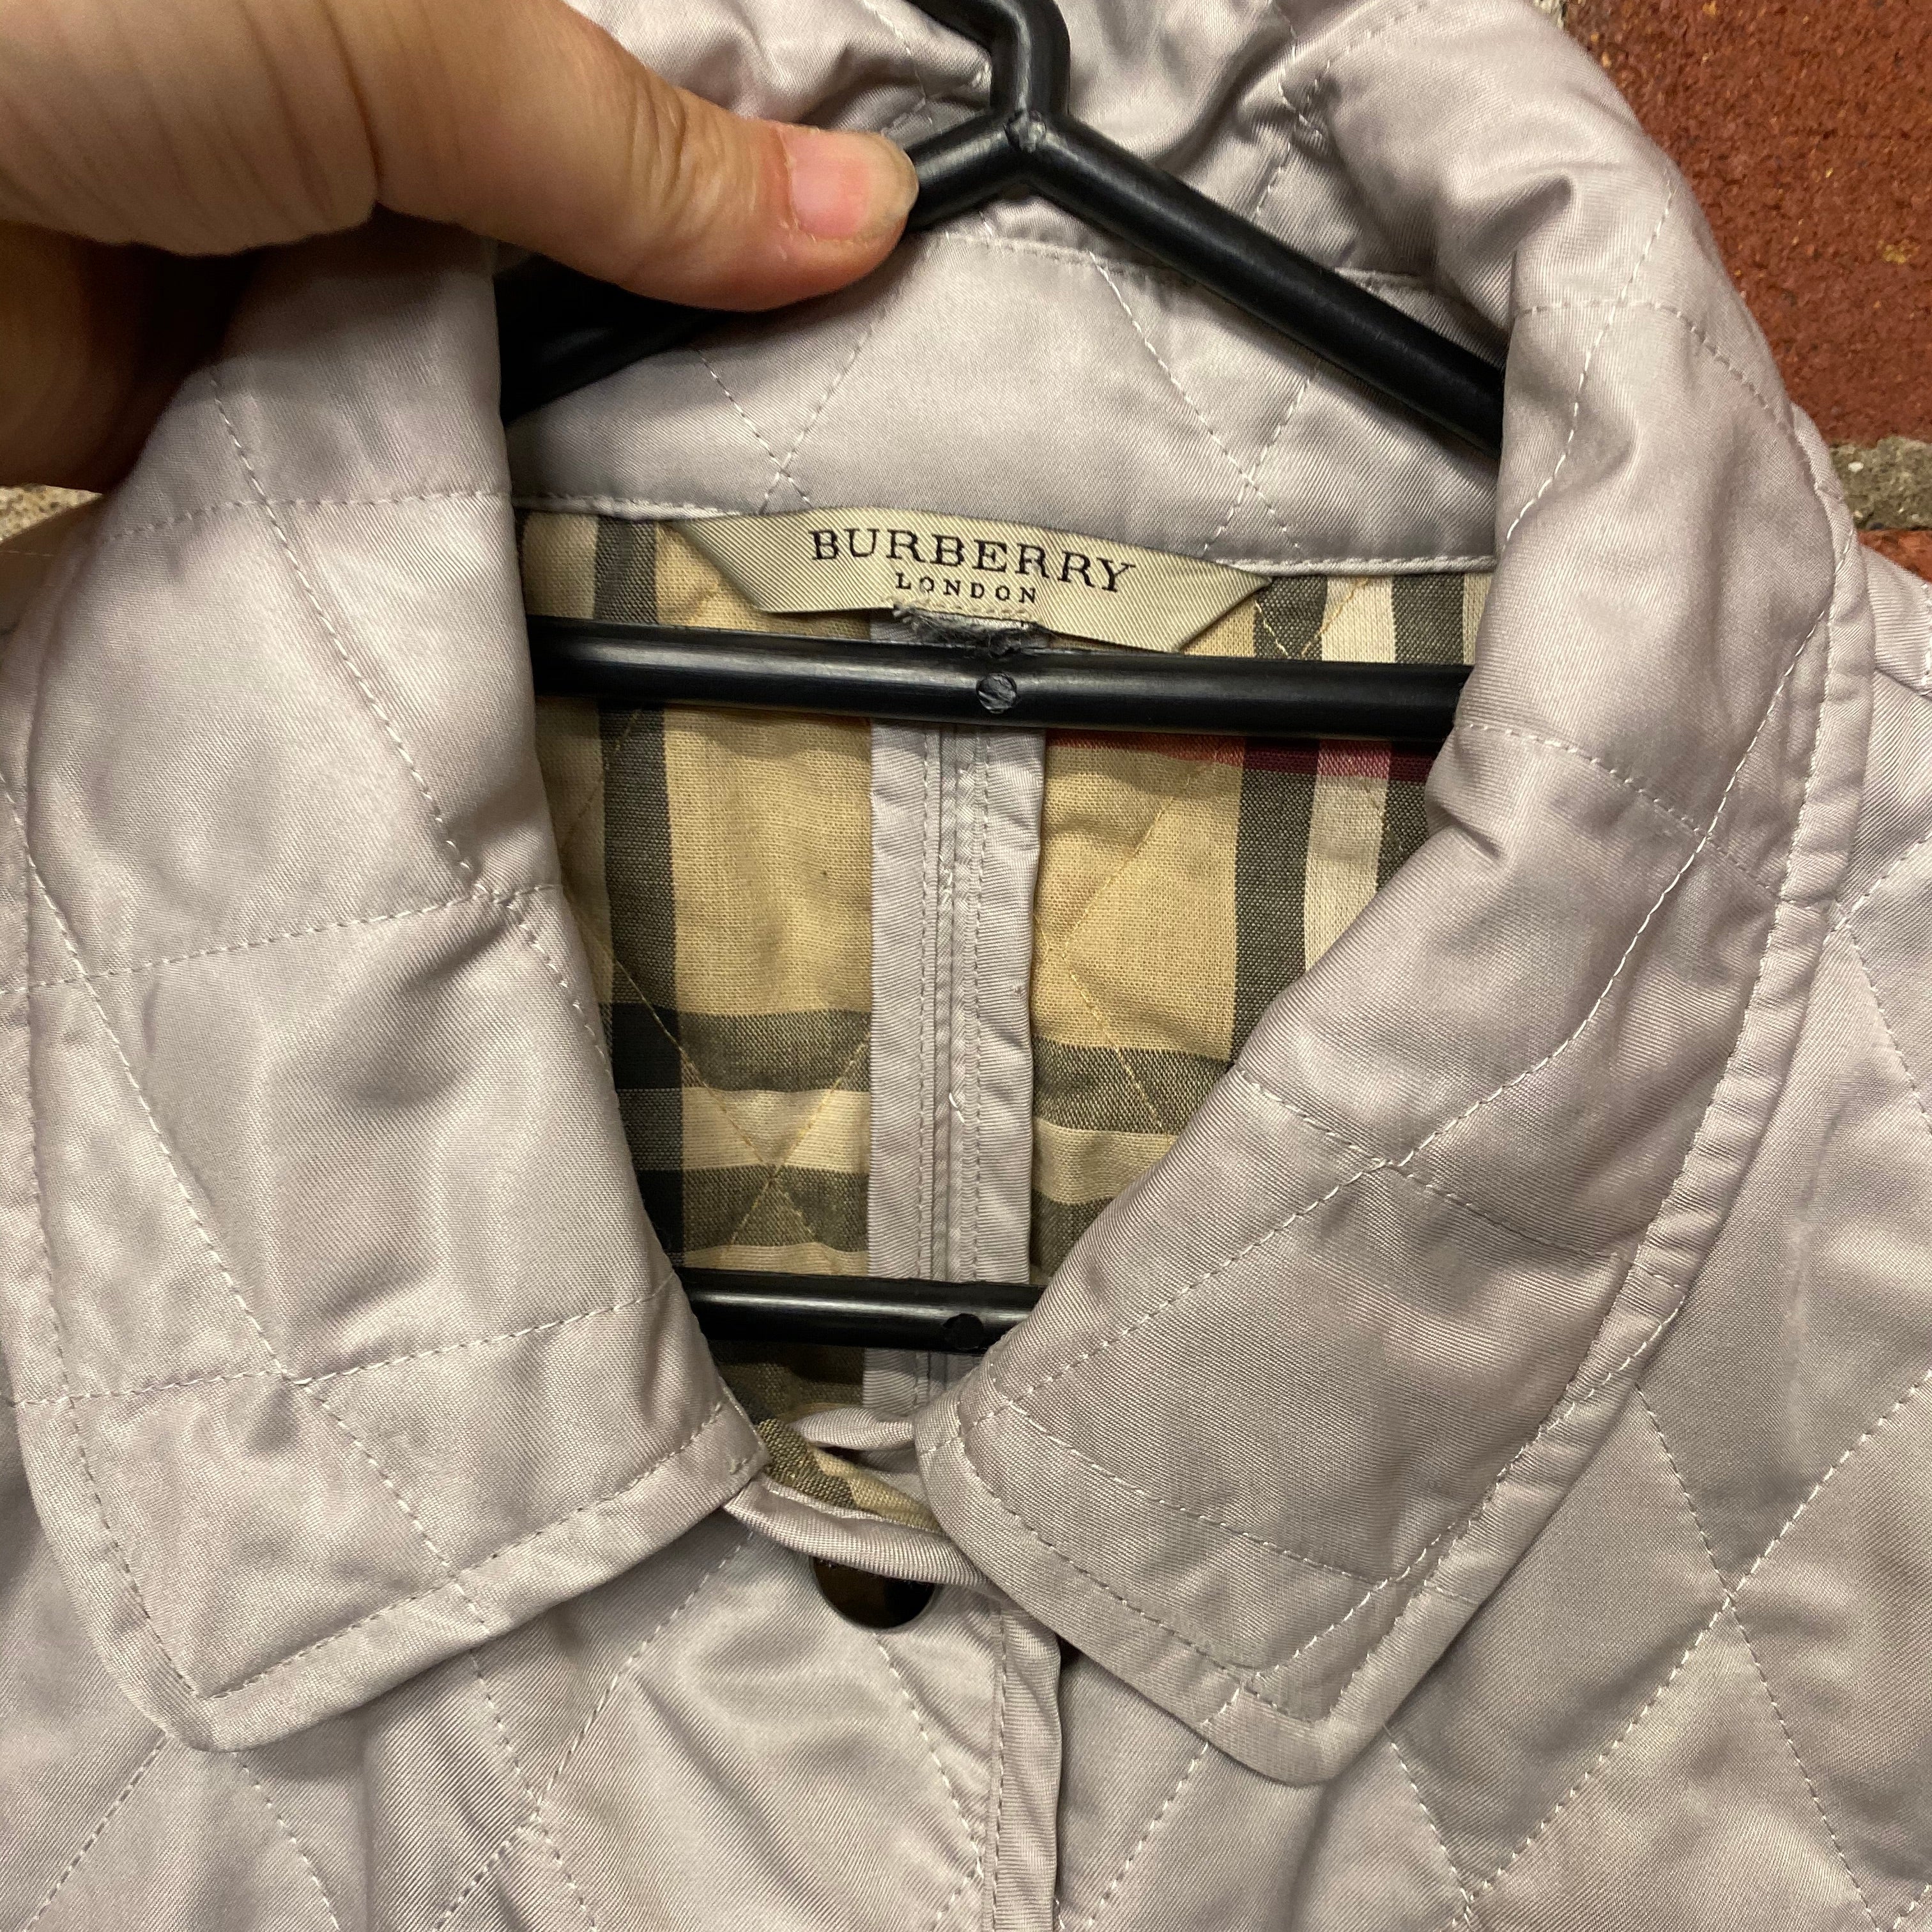 BURBERRY quilted jacket